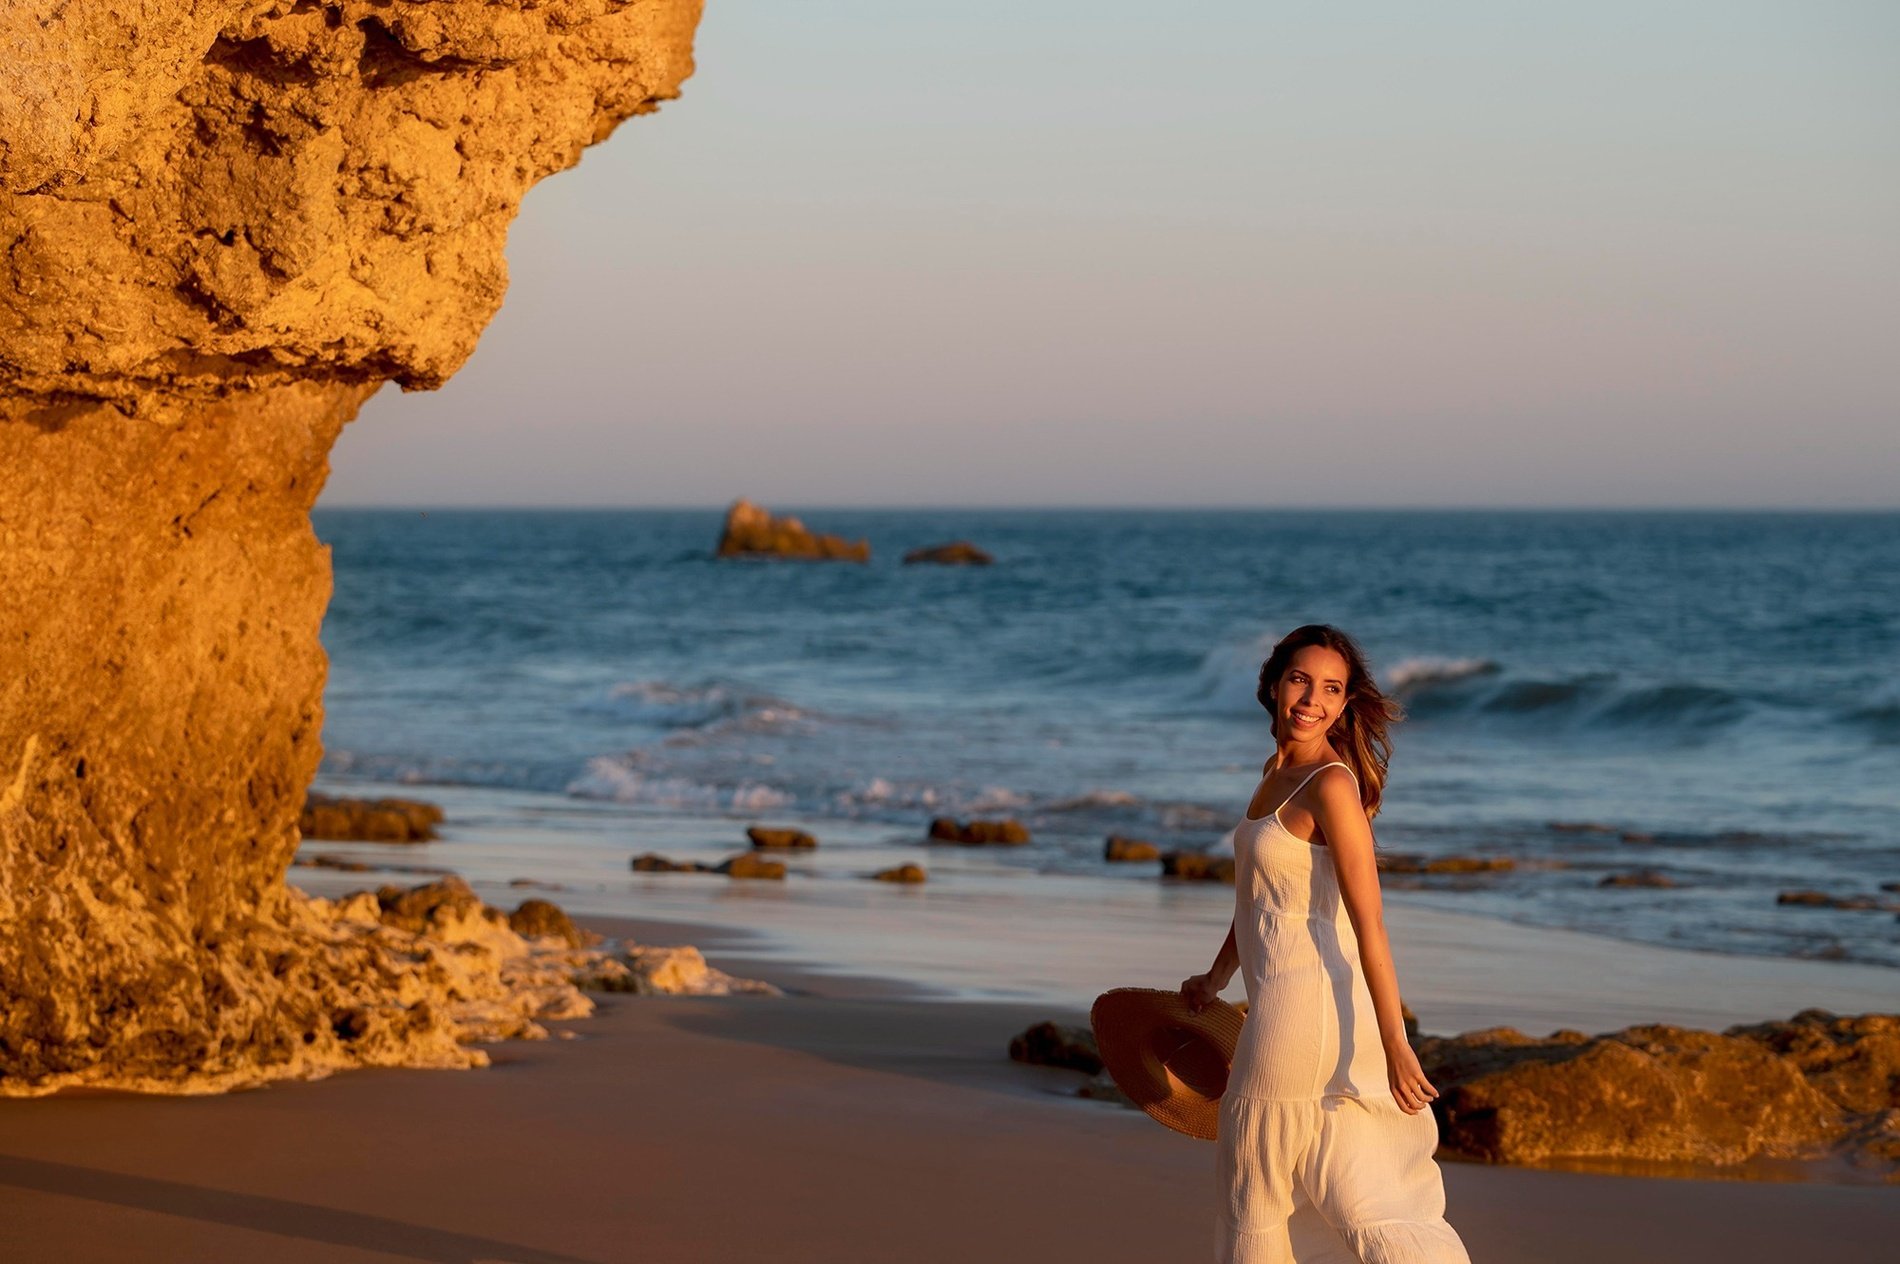 a woman in a white dress is walking on the beach